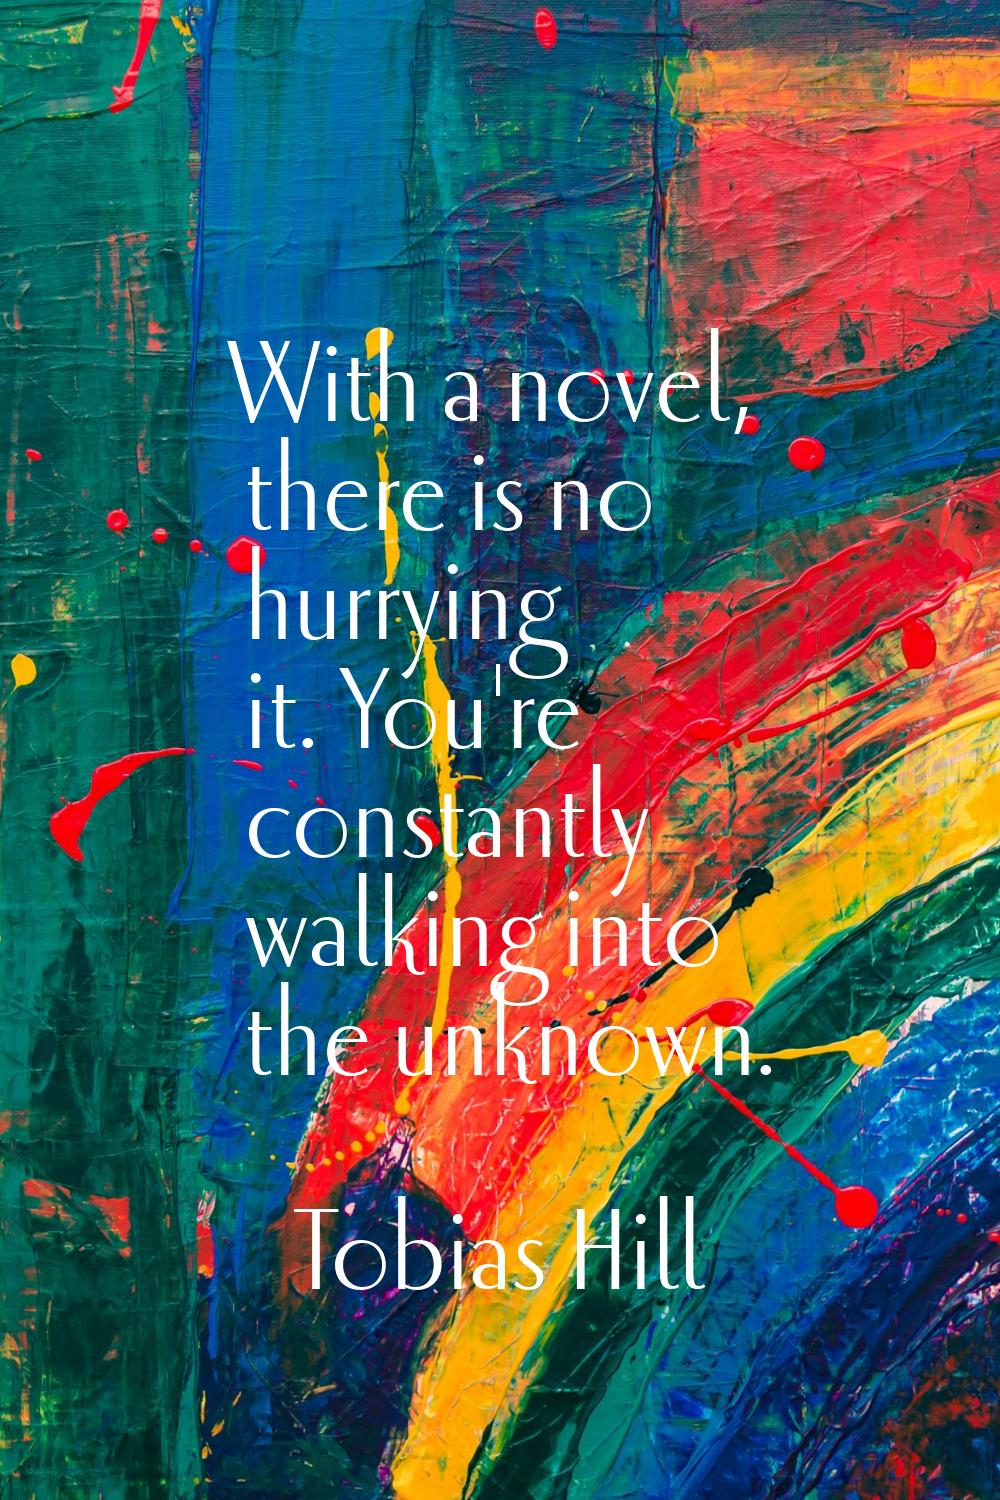 With a novel, there is no hurrying it. You're constantly walking into the unknown.